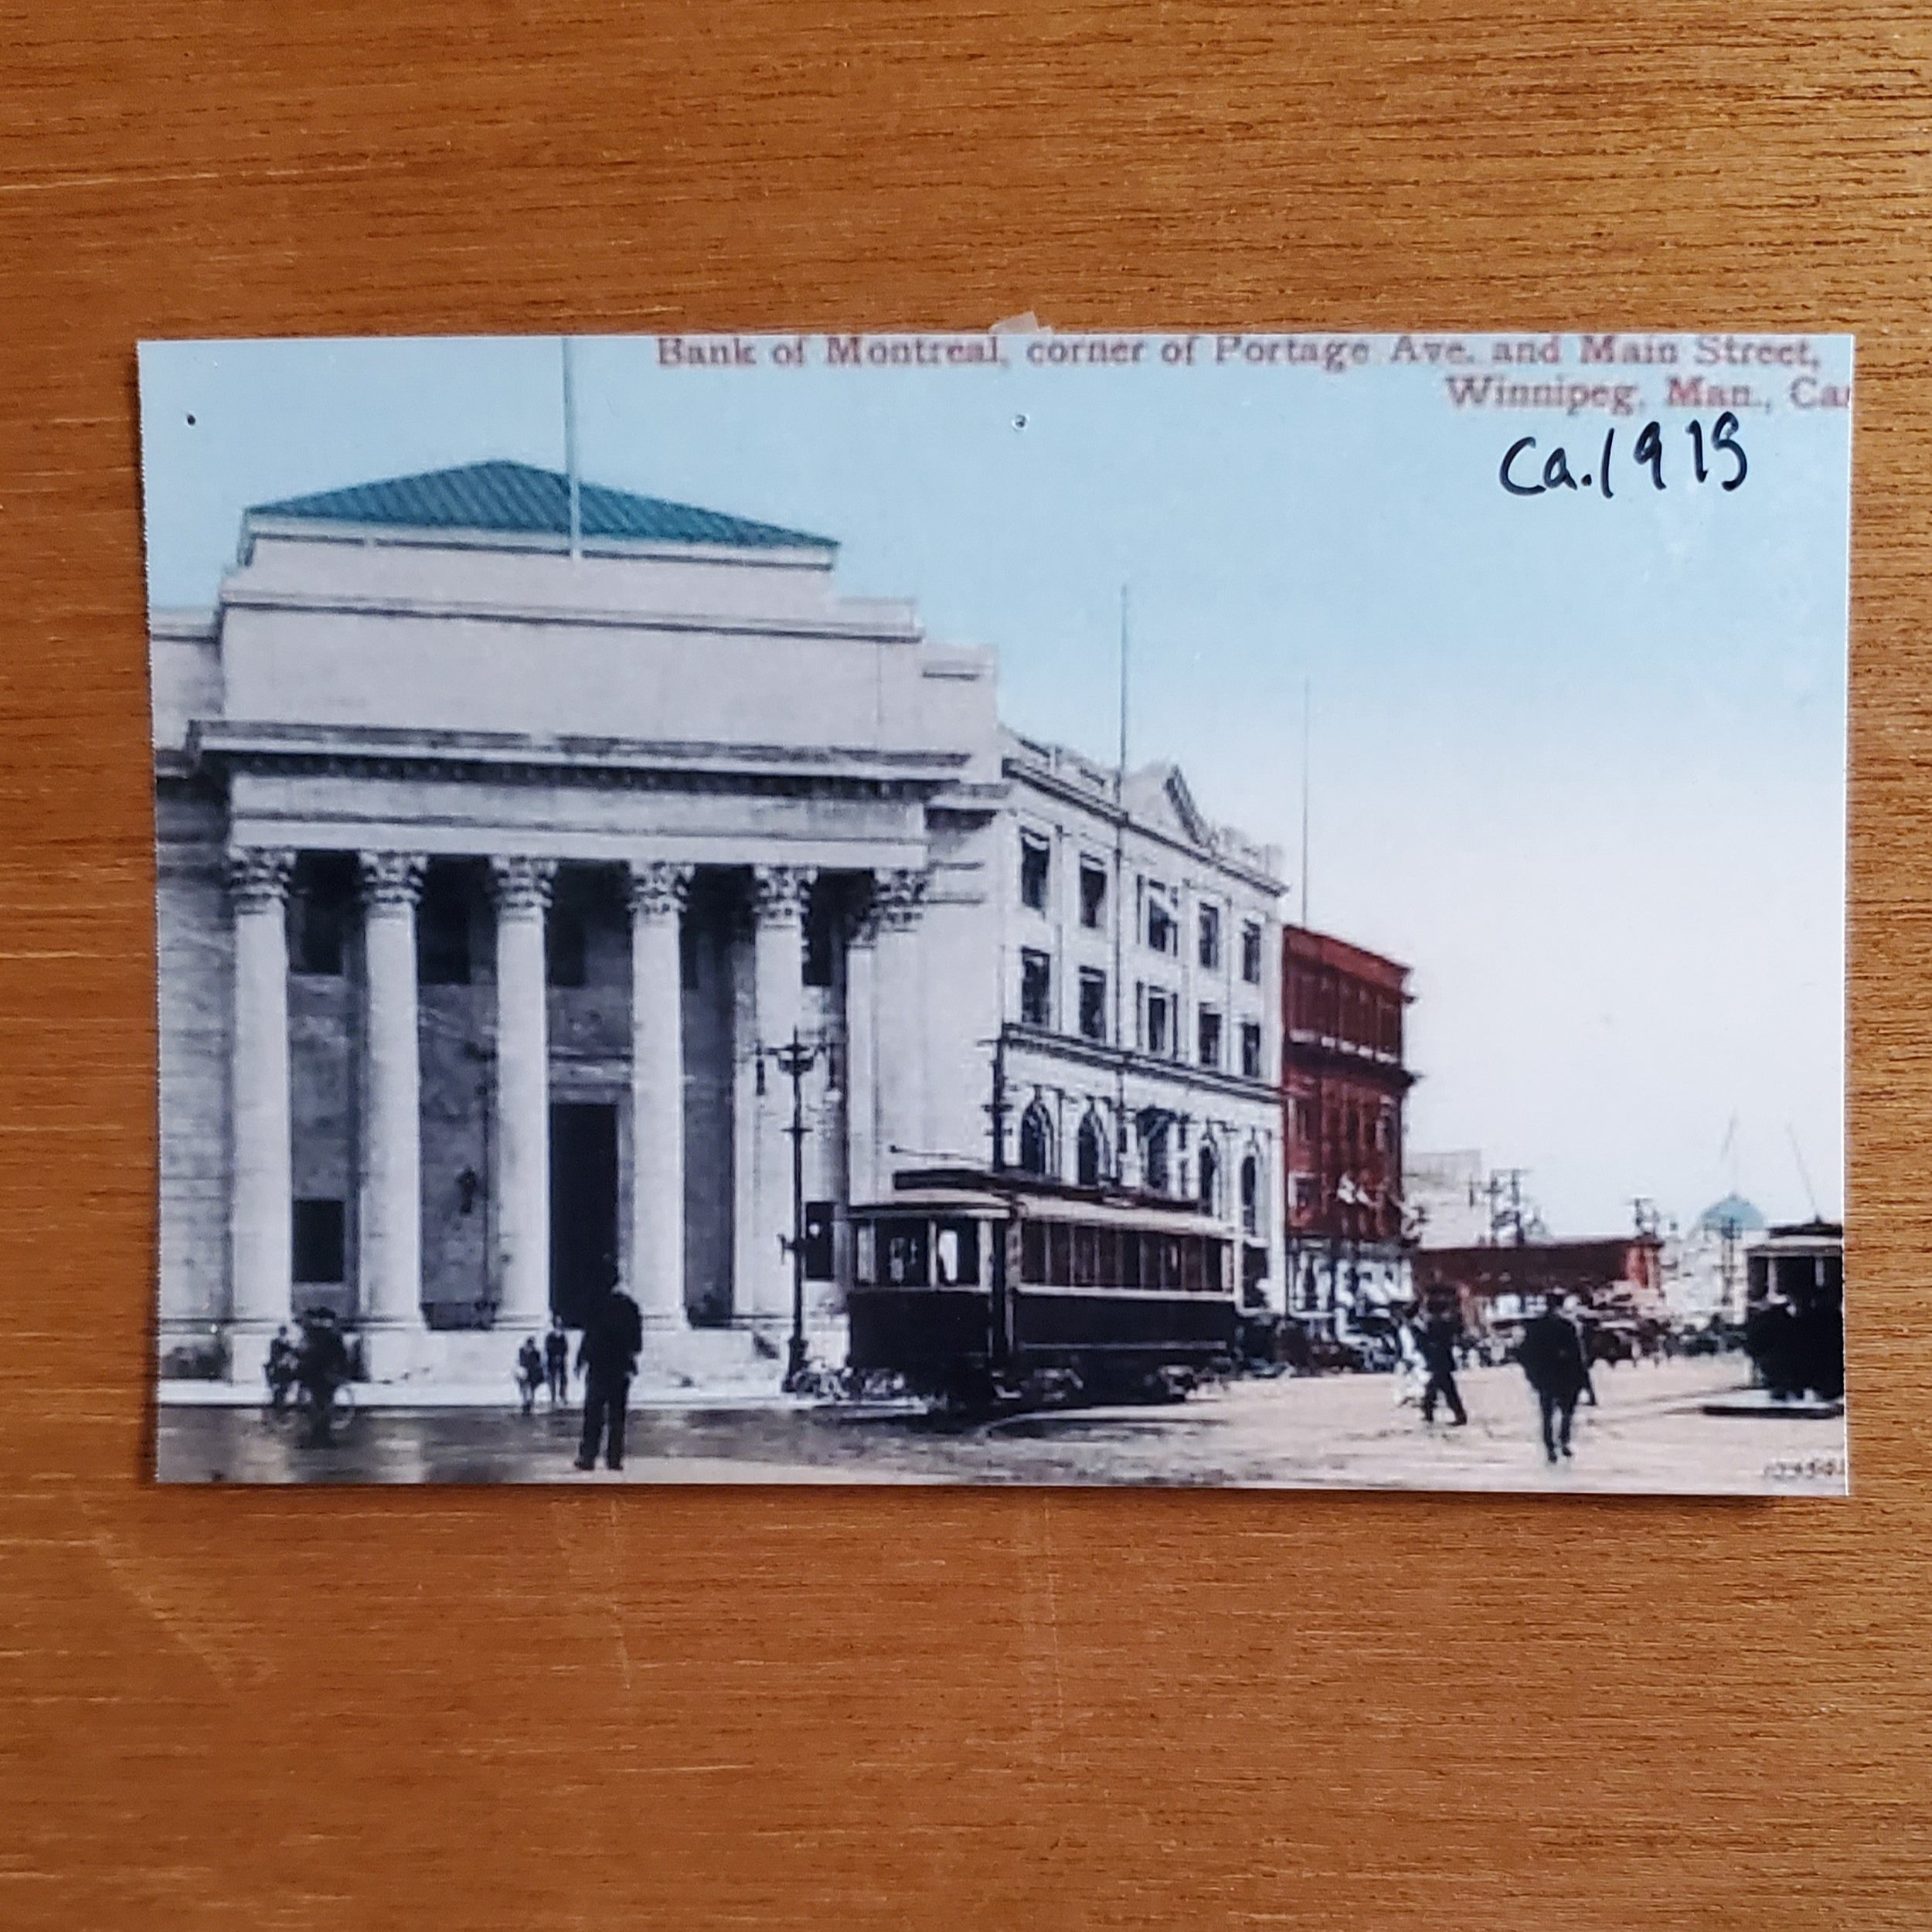  A photo of the Bank of Montreal taken in 1915 